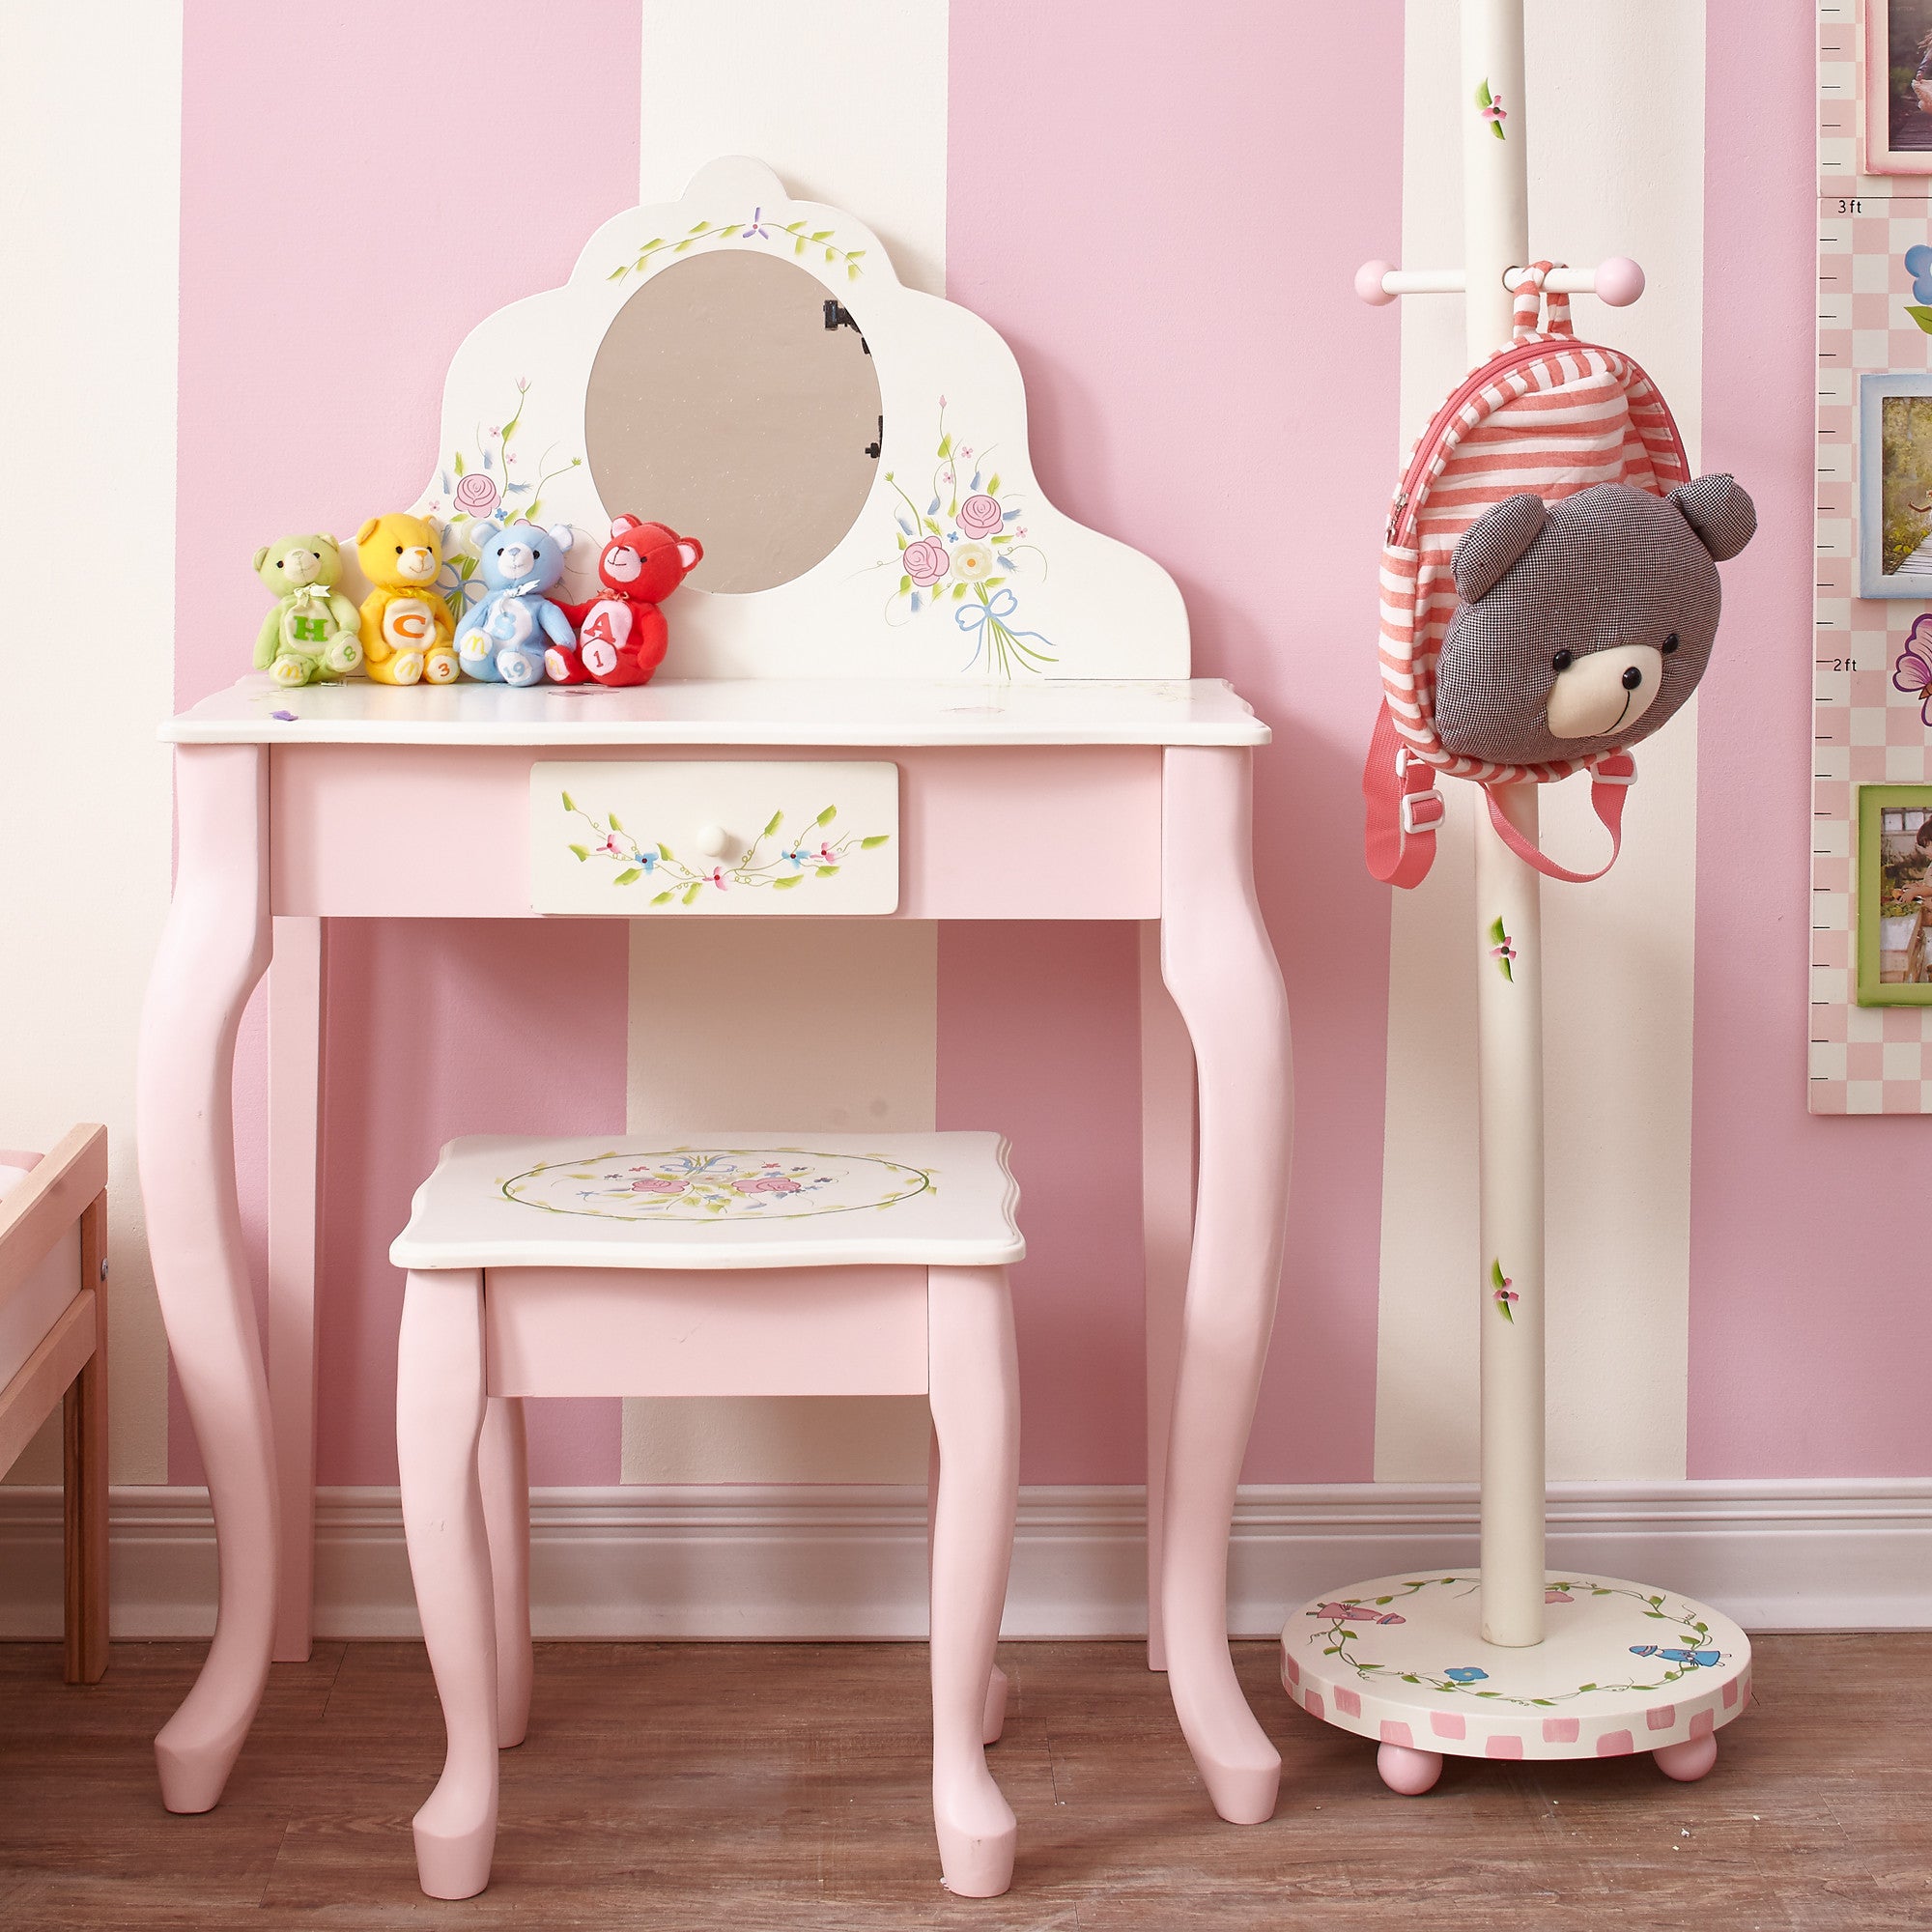 Fantasy Fields Kids Furniture Play Vanity Table and Stool, Pink/White